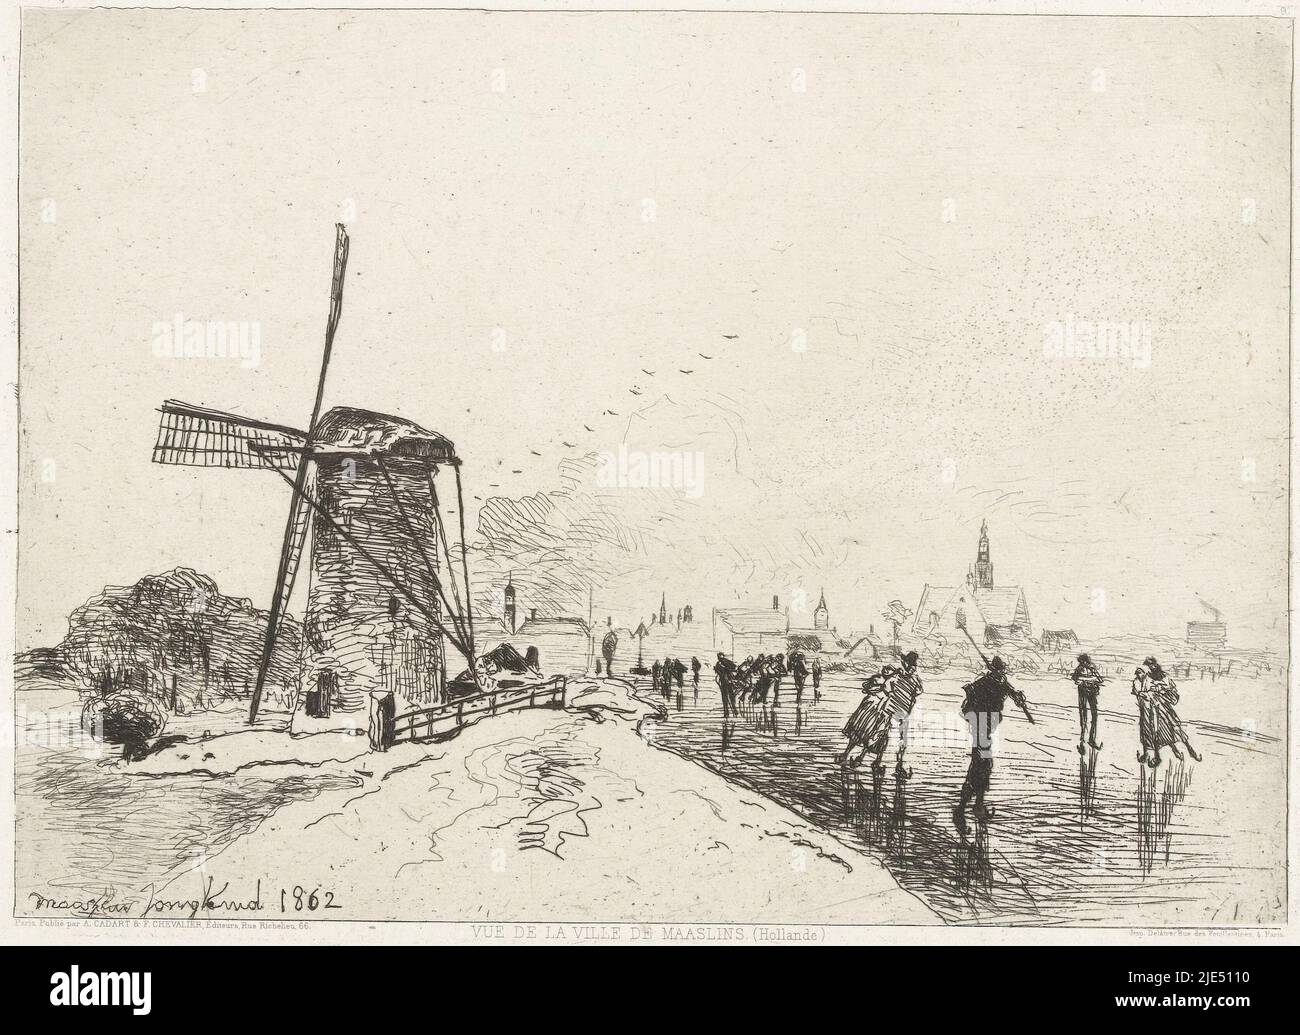 Water striders on the ice of a canal, on which a windmill stands. In the distance the profile of a town (Maassluis), View of Maassluis Vue de la ville de Maaslins (Hollande)., print maker: Johan Barthold Jongkind, (mentioned on object), printer: Auguste Delâtre, (mentioned on object), publisher: A. Cadart & F. Chevalier, (mentioned on object), Paris, 1862, paper, etching, h 235 mm × w 322 mm Stock Photo